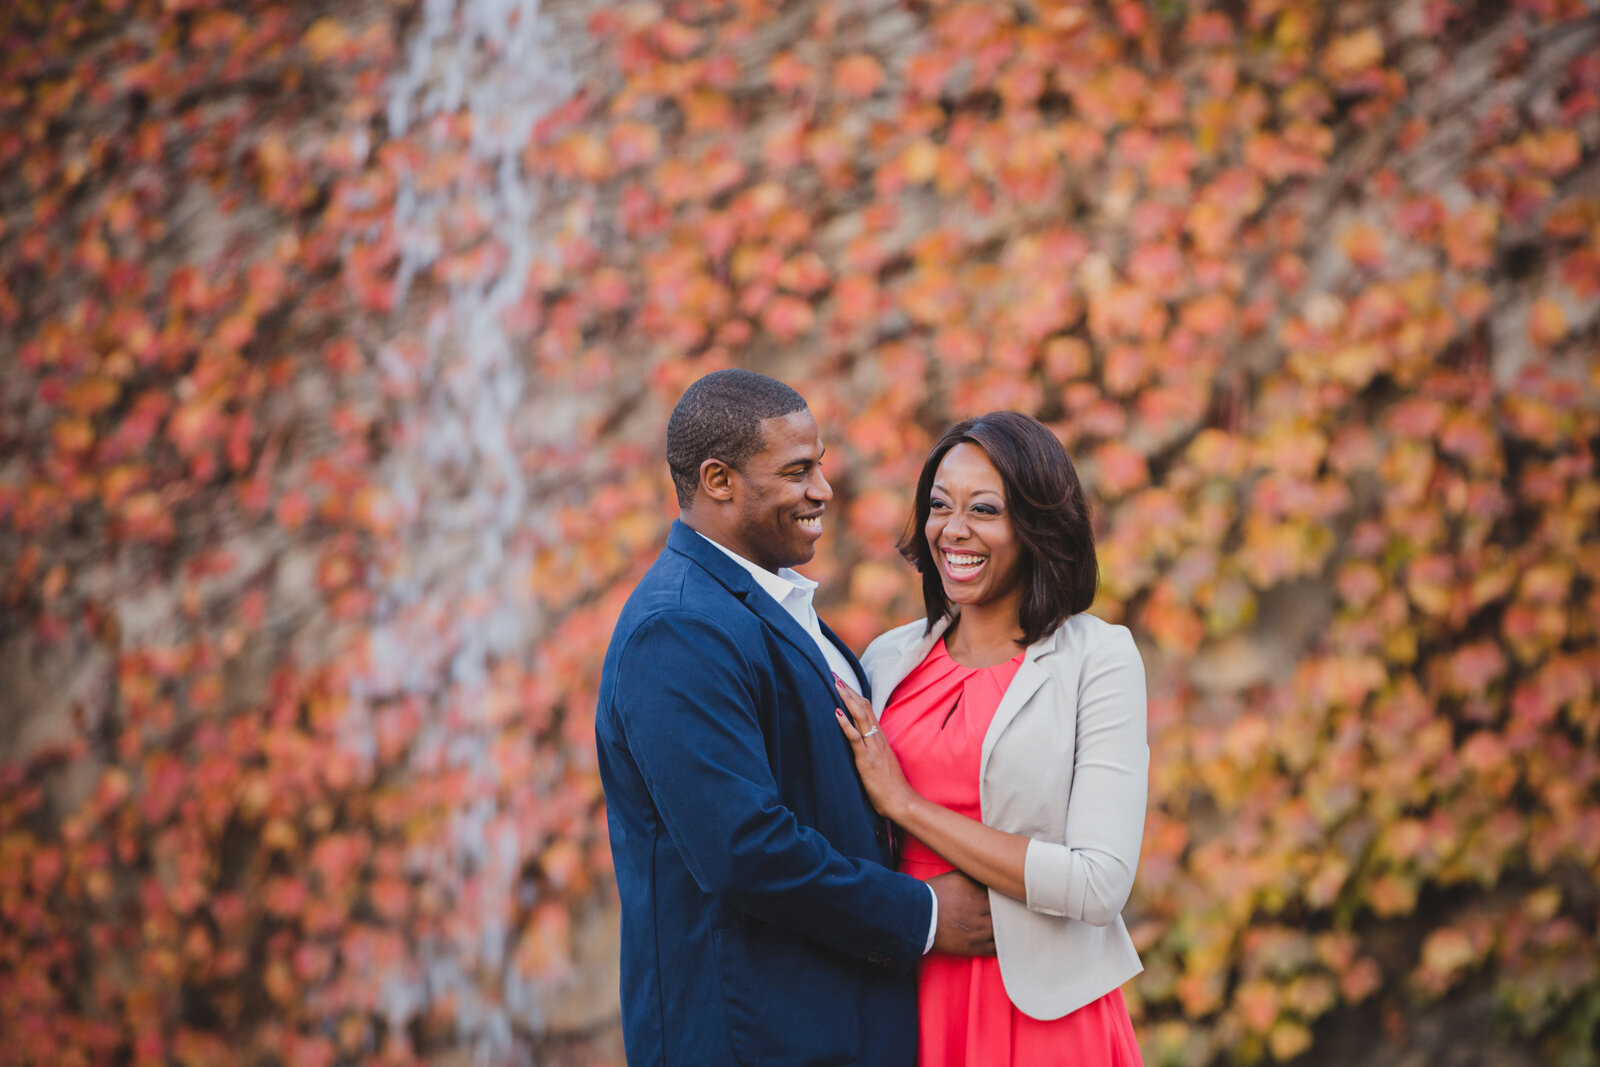 Downtown Omaha Engagement Session